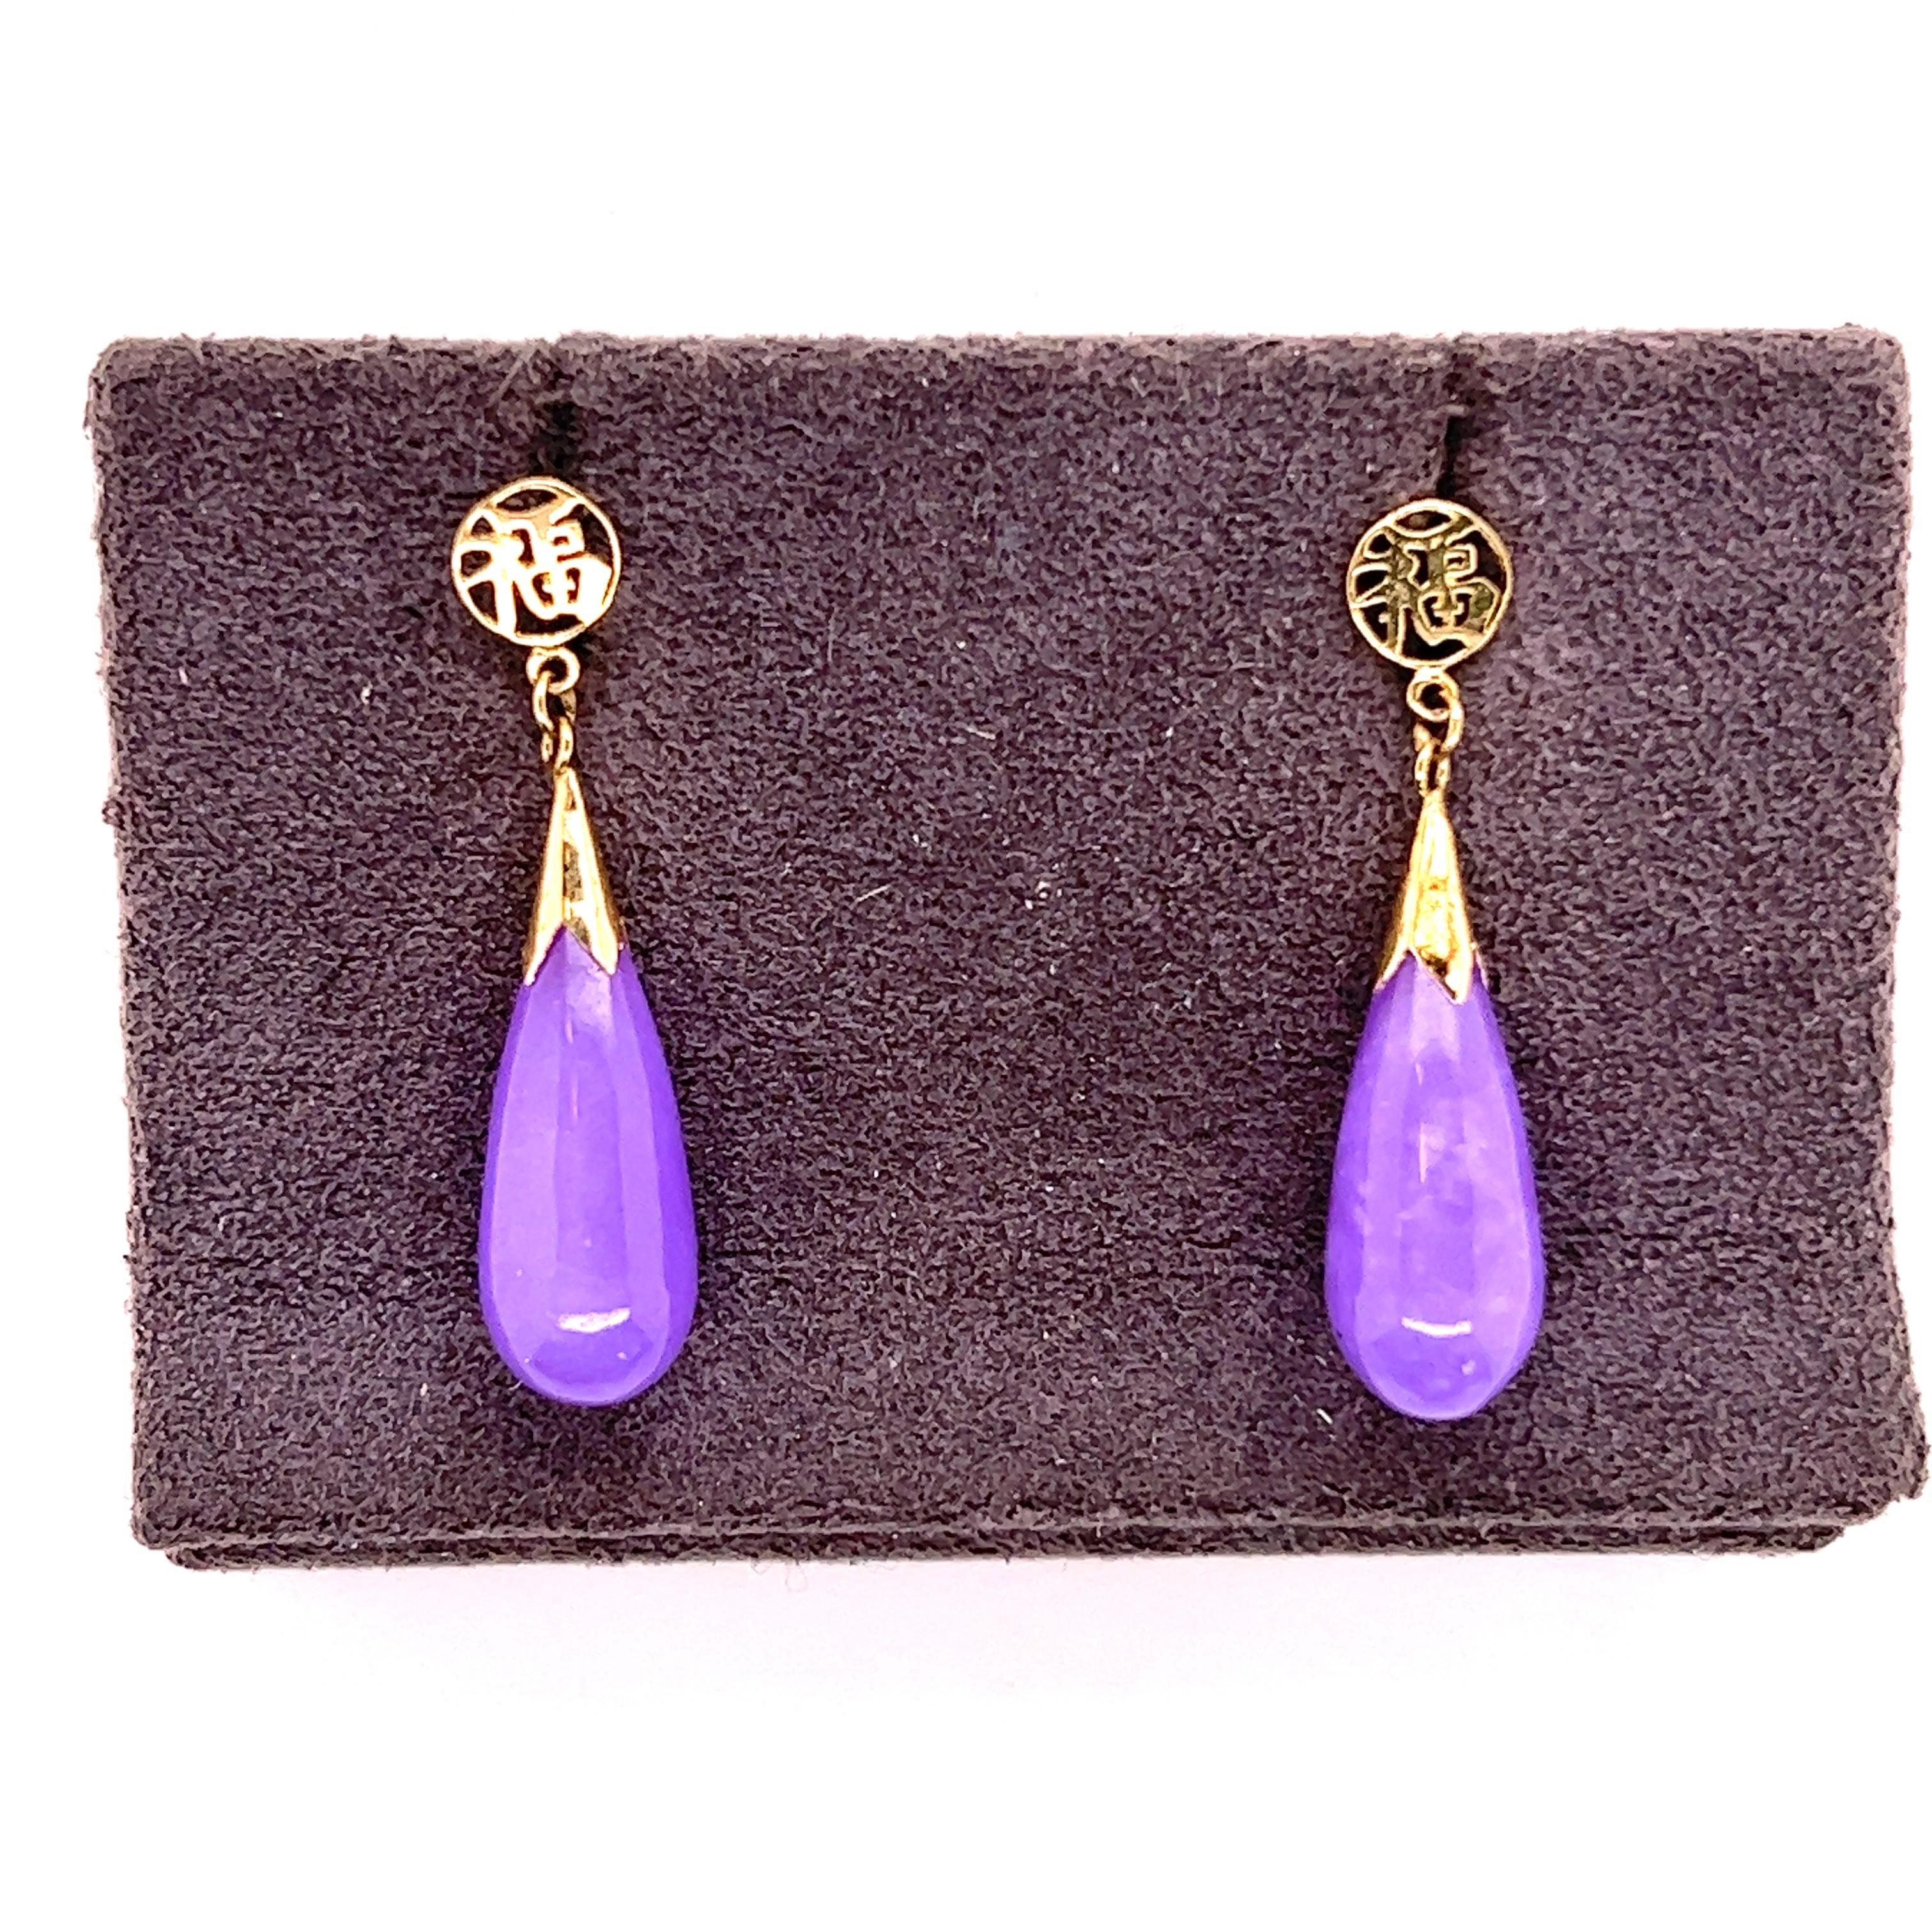 14kt yellow gold pendulum earrings. The earrings contain one round yellow gold portion at the top of the earrings made into a kanji (good luck symbol). Suspended from the top kanji are smooth and sleek pendulums of purple jade. The purple jade has